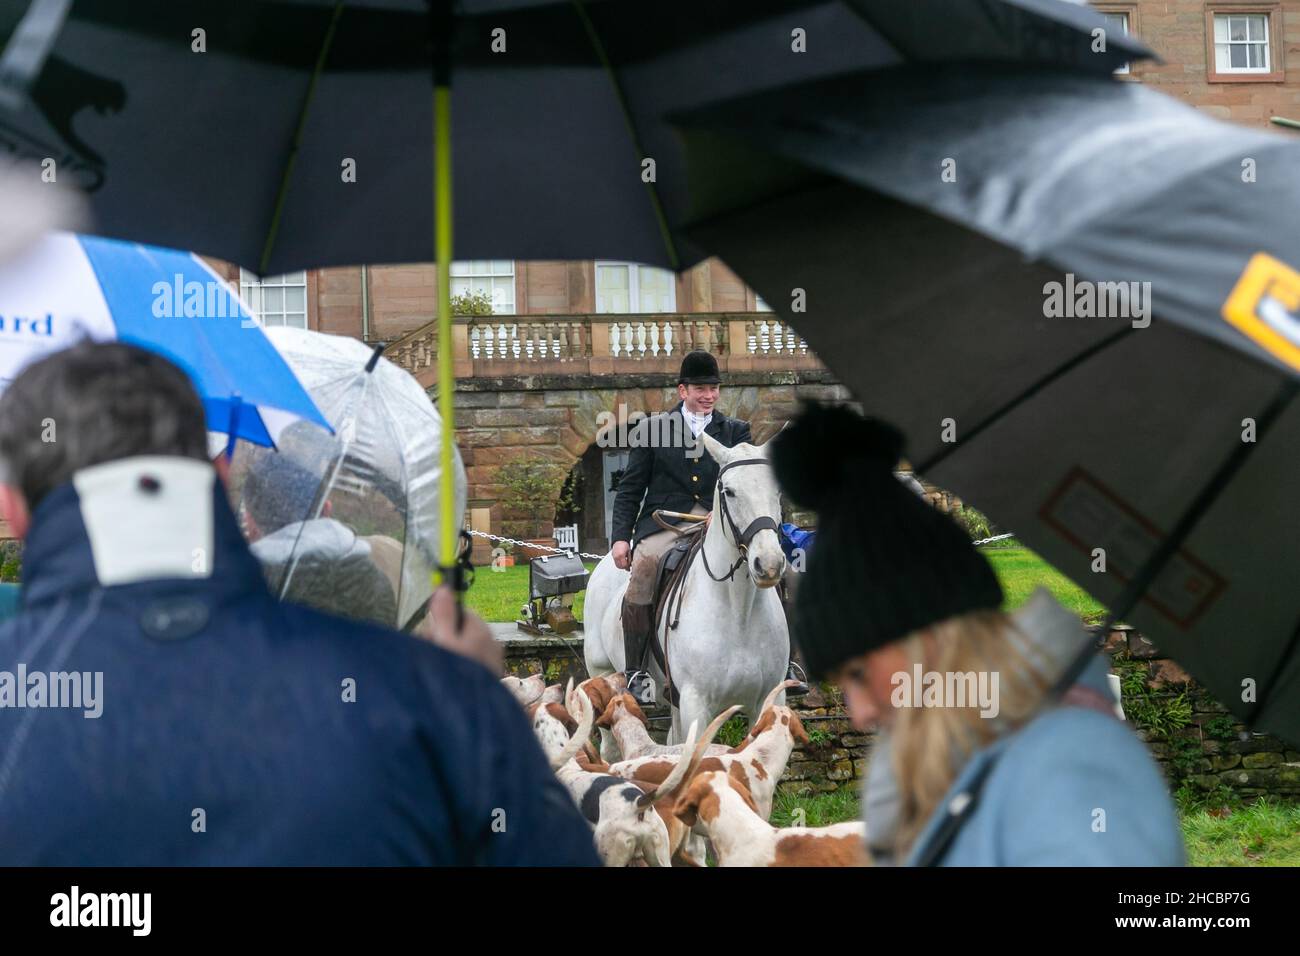 Hagley, Worcestershire, UK. 27th Dec, 2021. Horses and hounds gather with supporters in the rain for the first meet of the Albrighton and Woodland Hunt at Hagley Hall since the Coronavirus pandemic. The Albrighton and Woodland Hunt meet annually at Hagley Hall in Worcestershire. Credit: Peter Lopeman/Alamy Live News Stock Photo